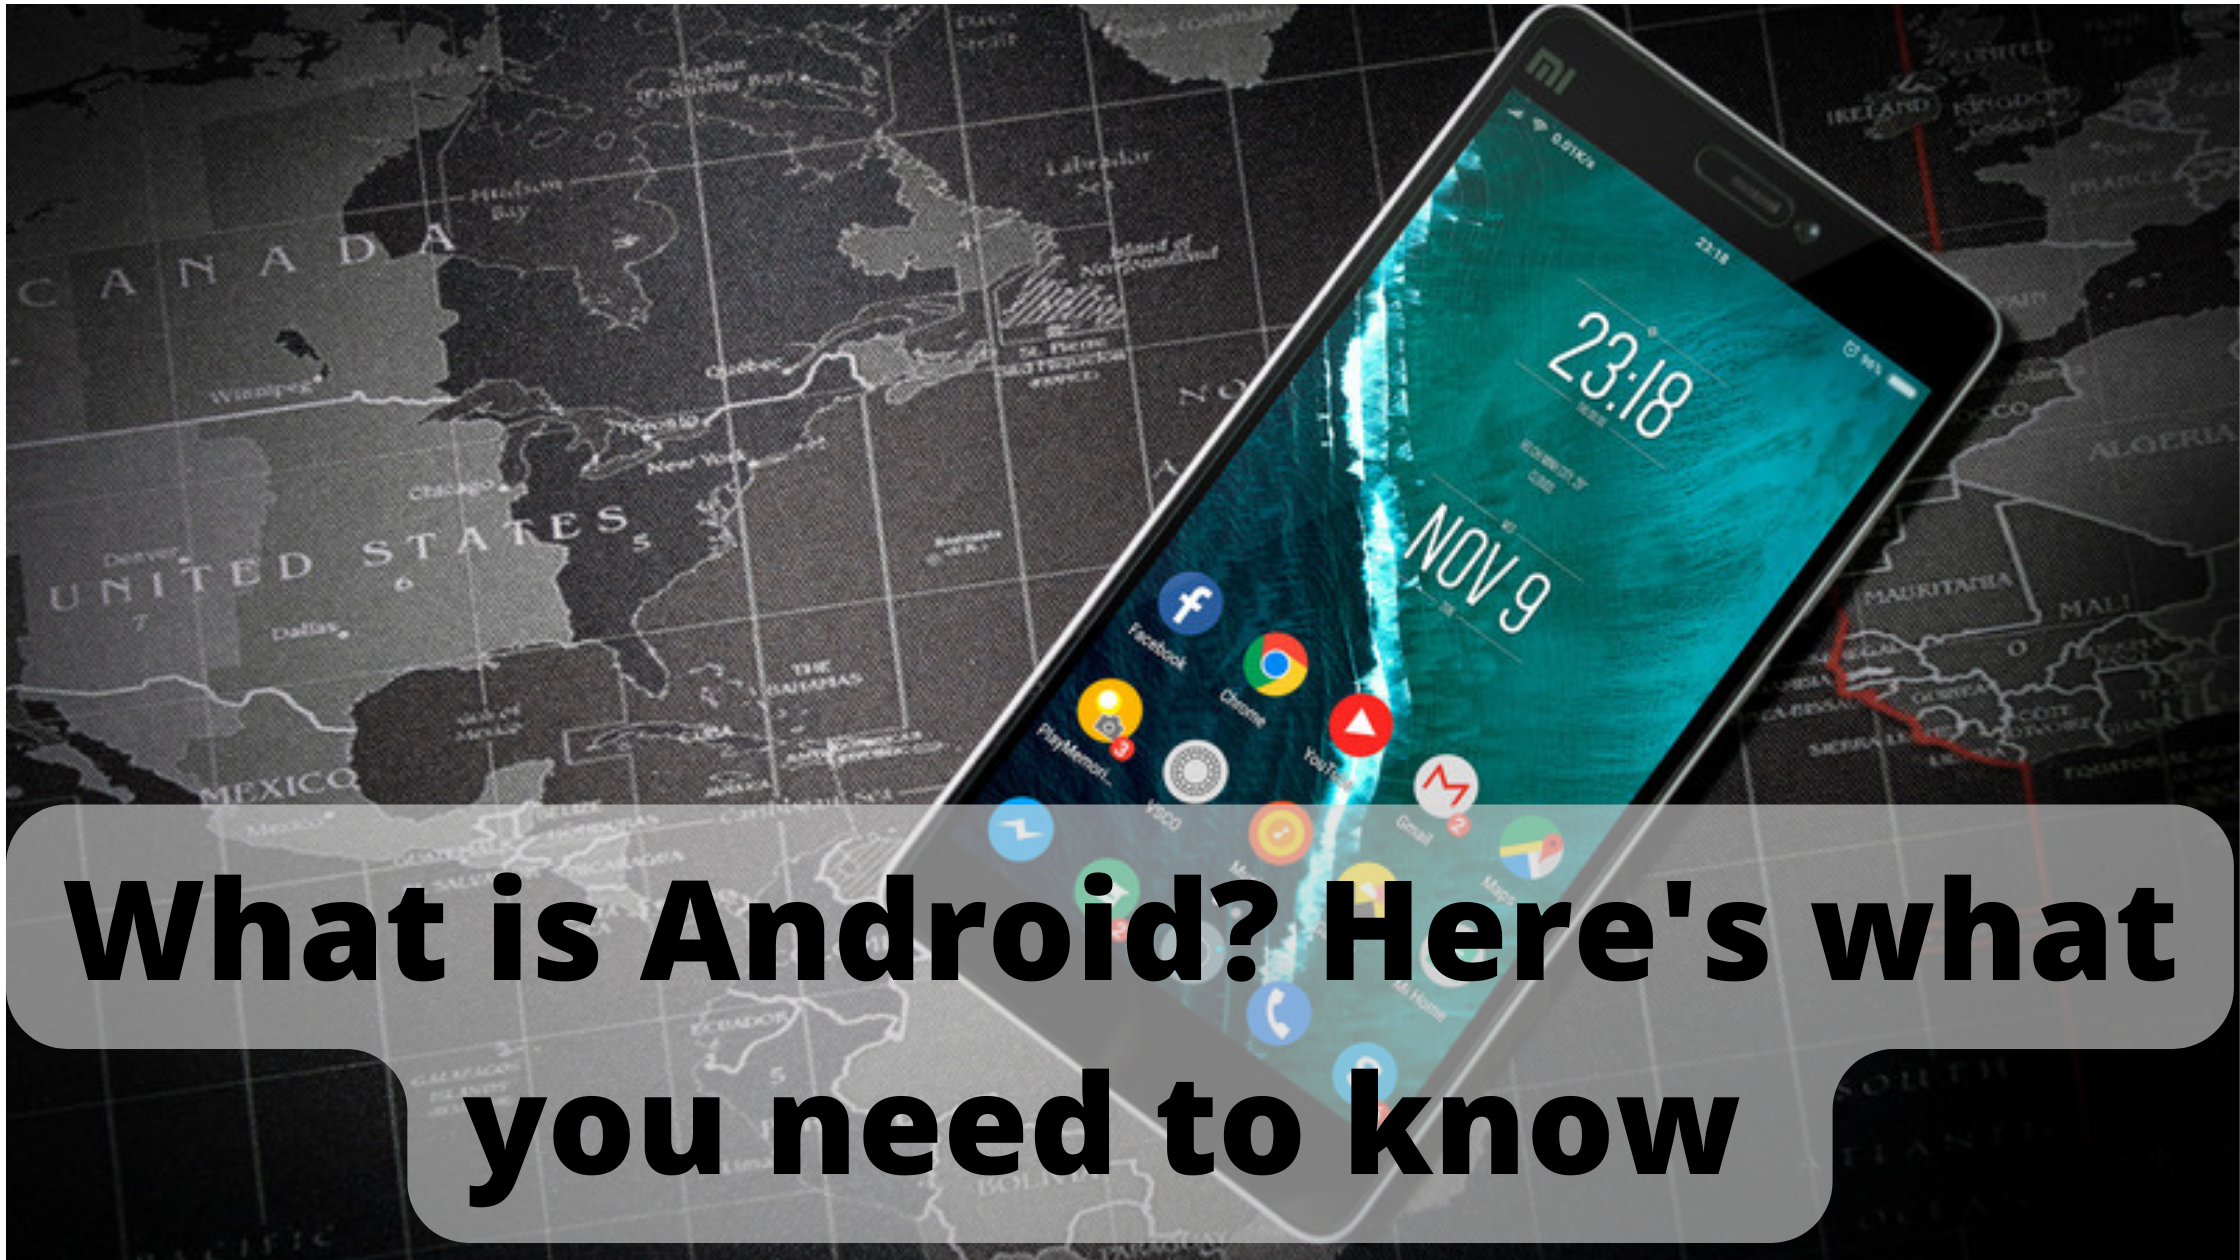 What is Android? Here’s what you need to know